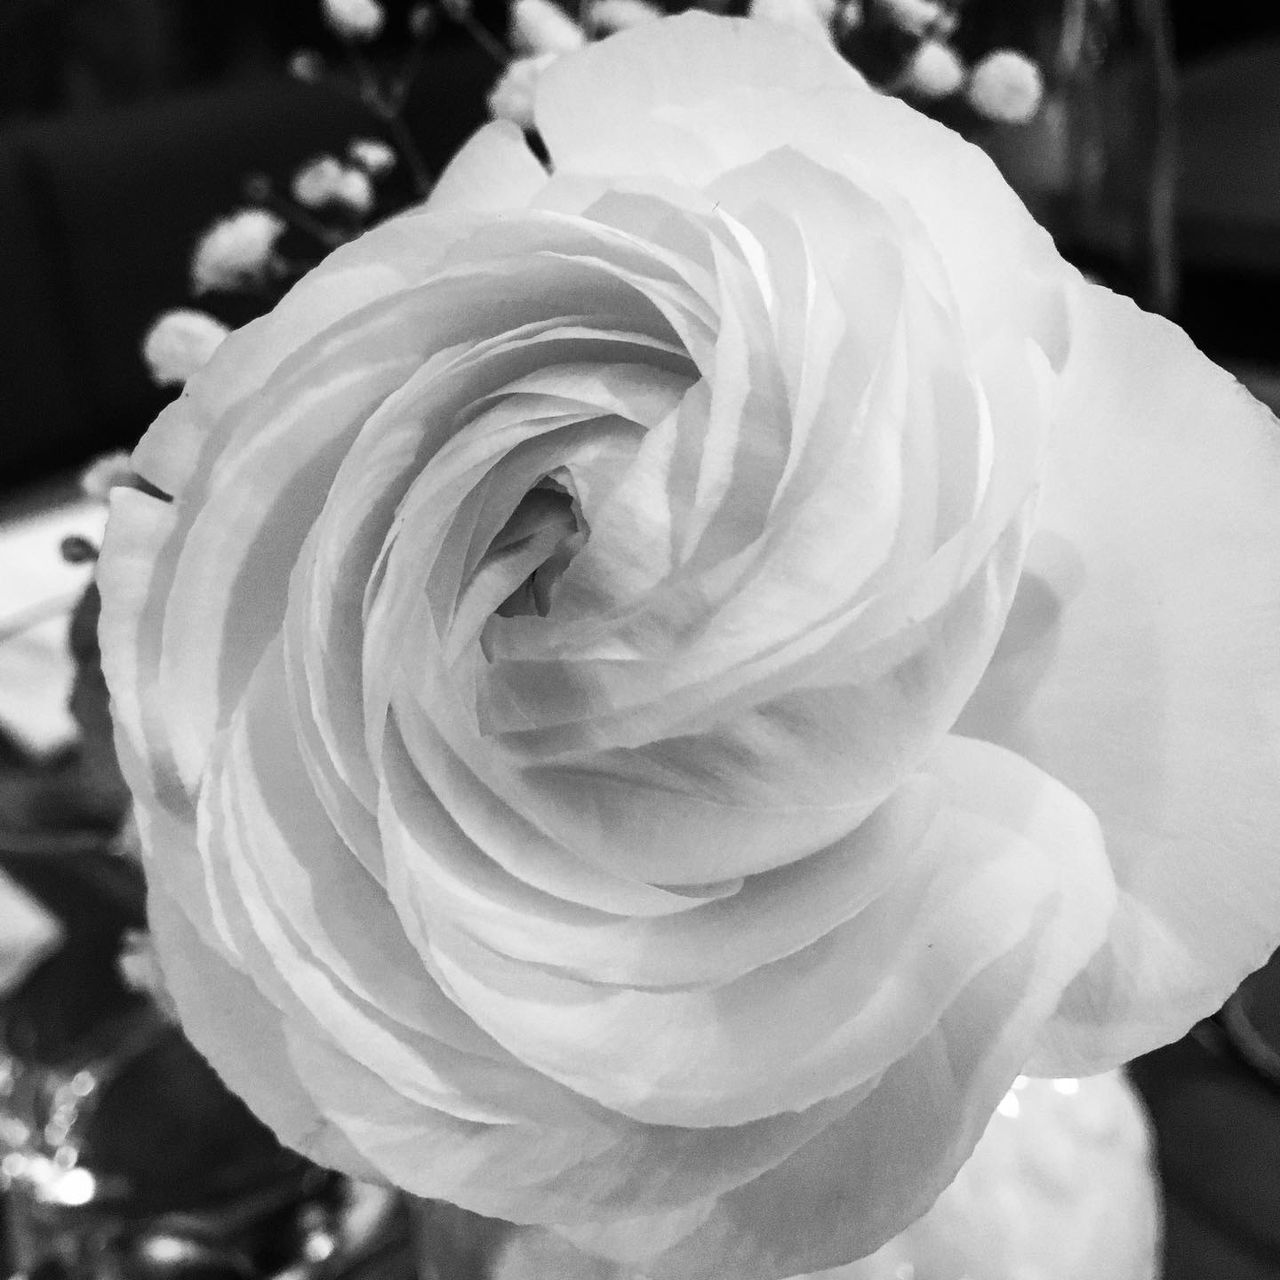 CLOSE-UP OF ROSE AGAINST WHITE ROSES